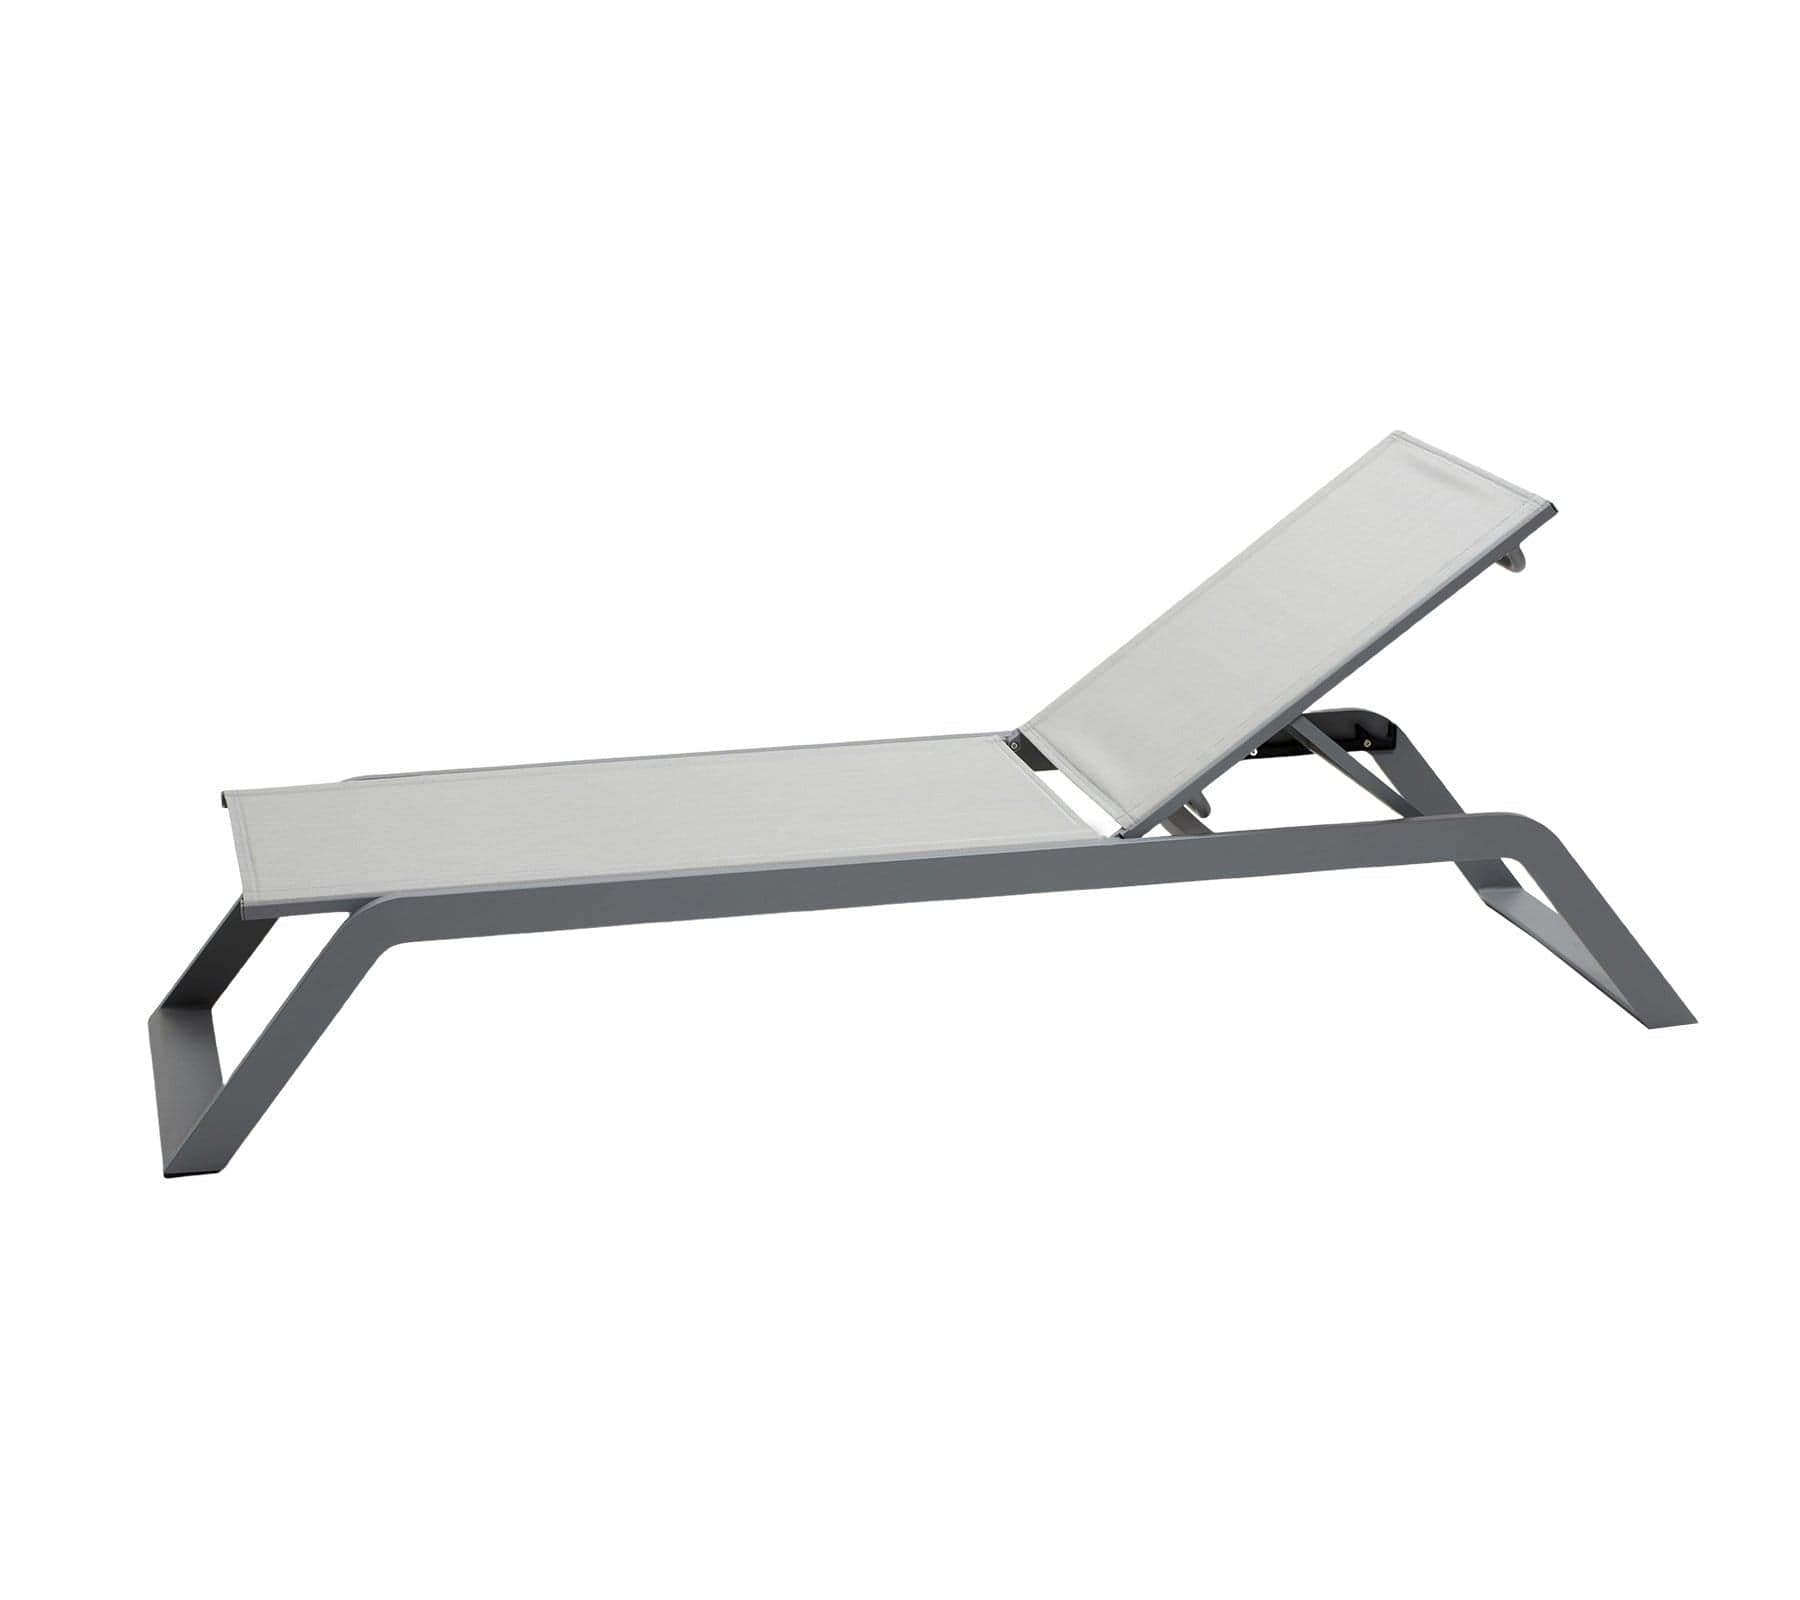 Boxhill's Siesta grey outdoor chaise lounge without cushion on white background